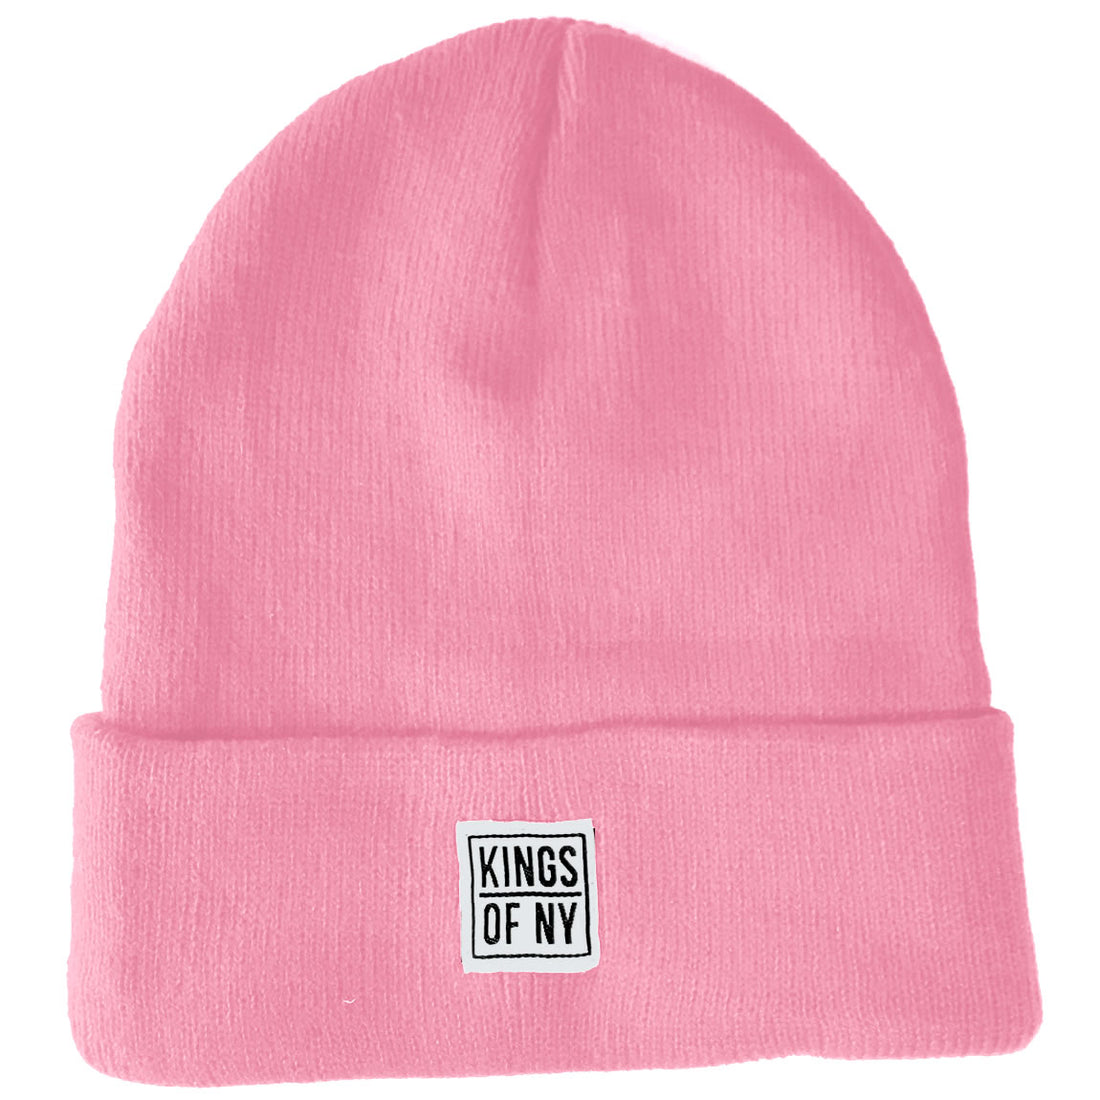 Light Pink Beanie Hat by Kings Of NY